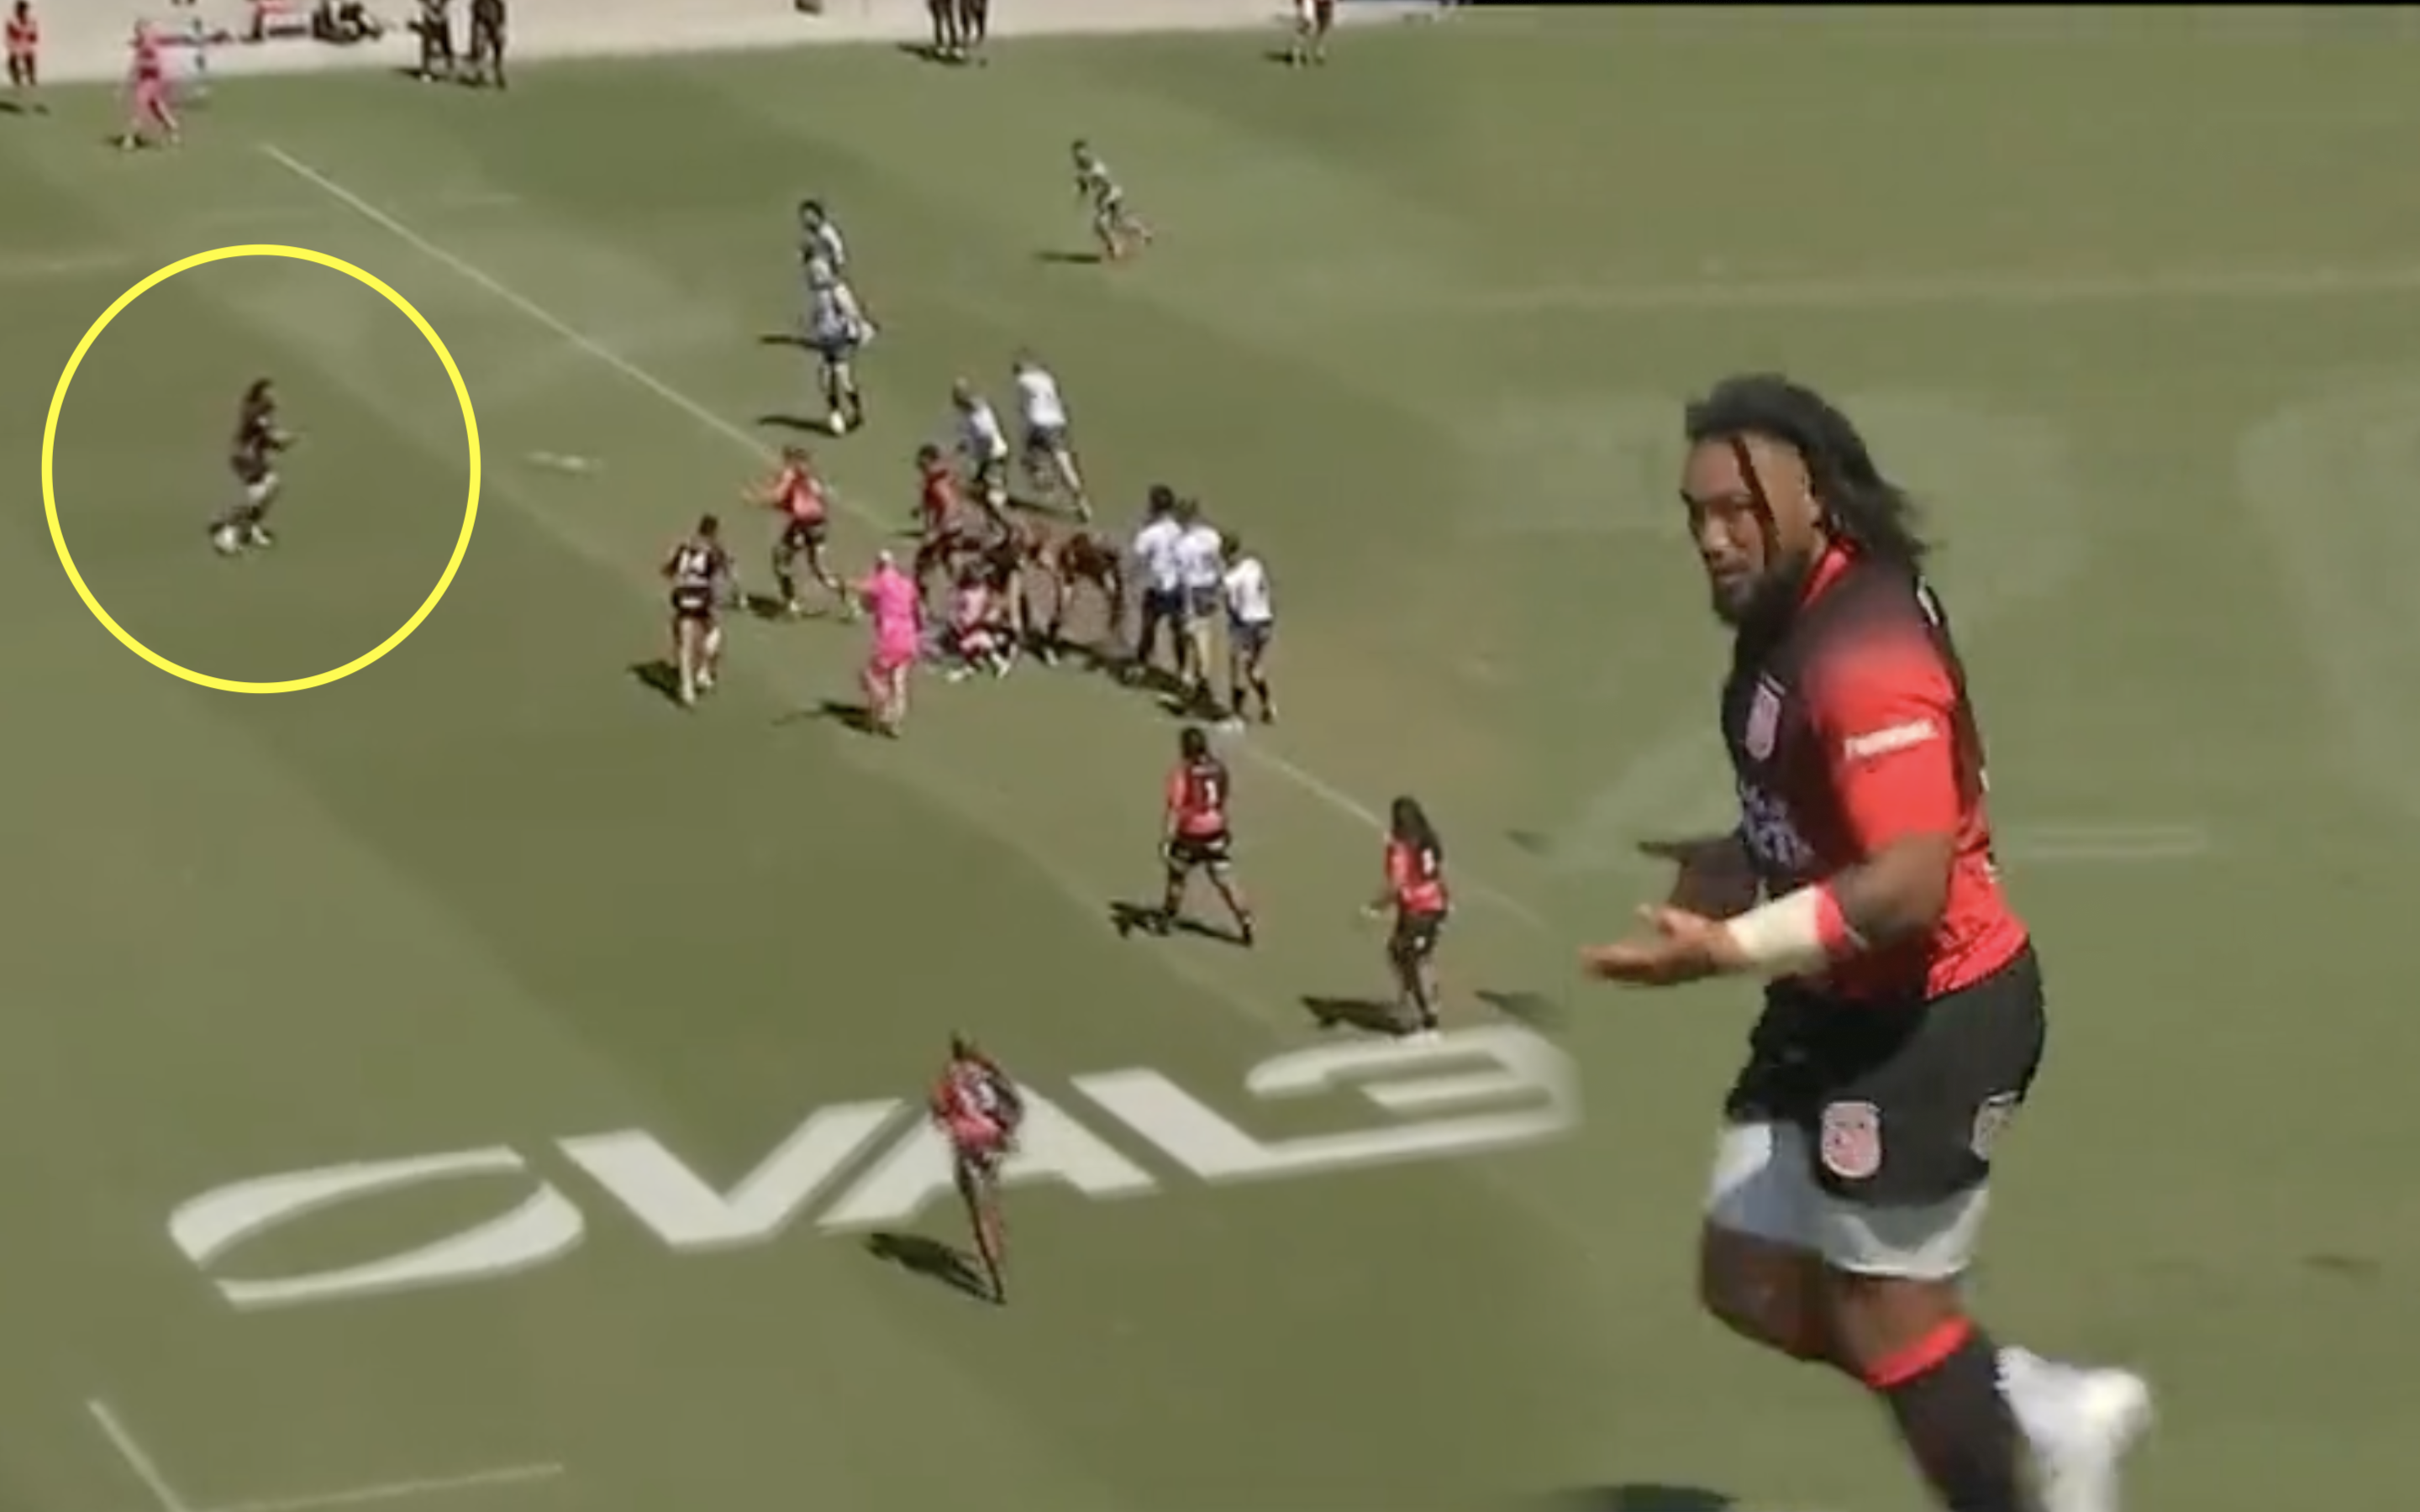 Ma'a Nonu achieves bizarre career-first at the age of 41 to signal end times